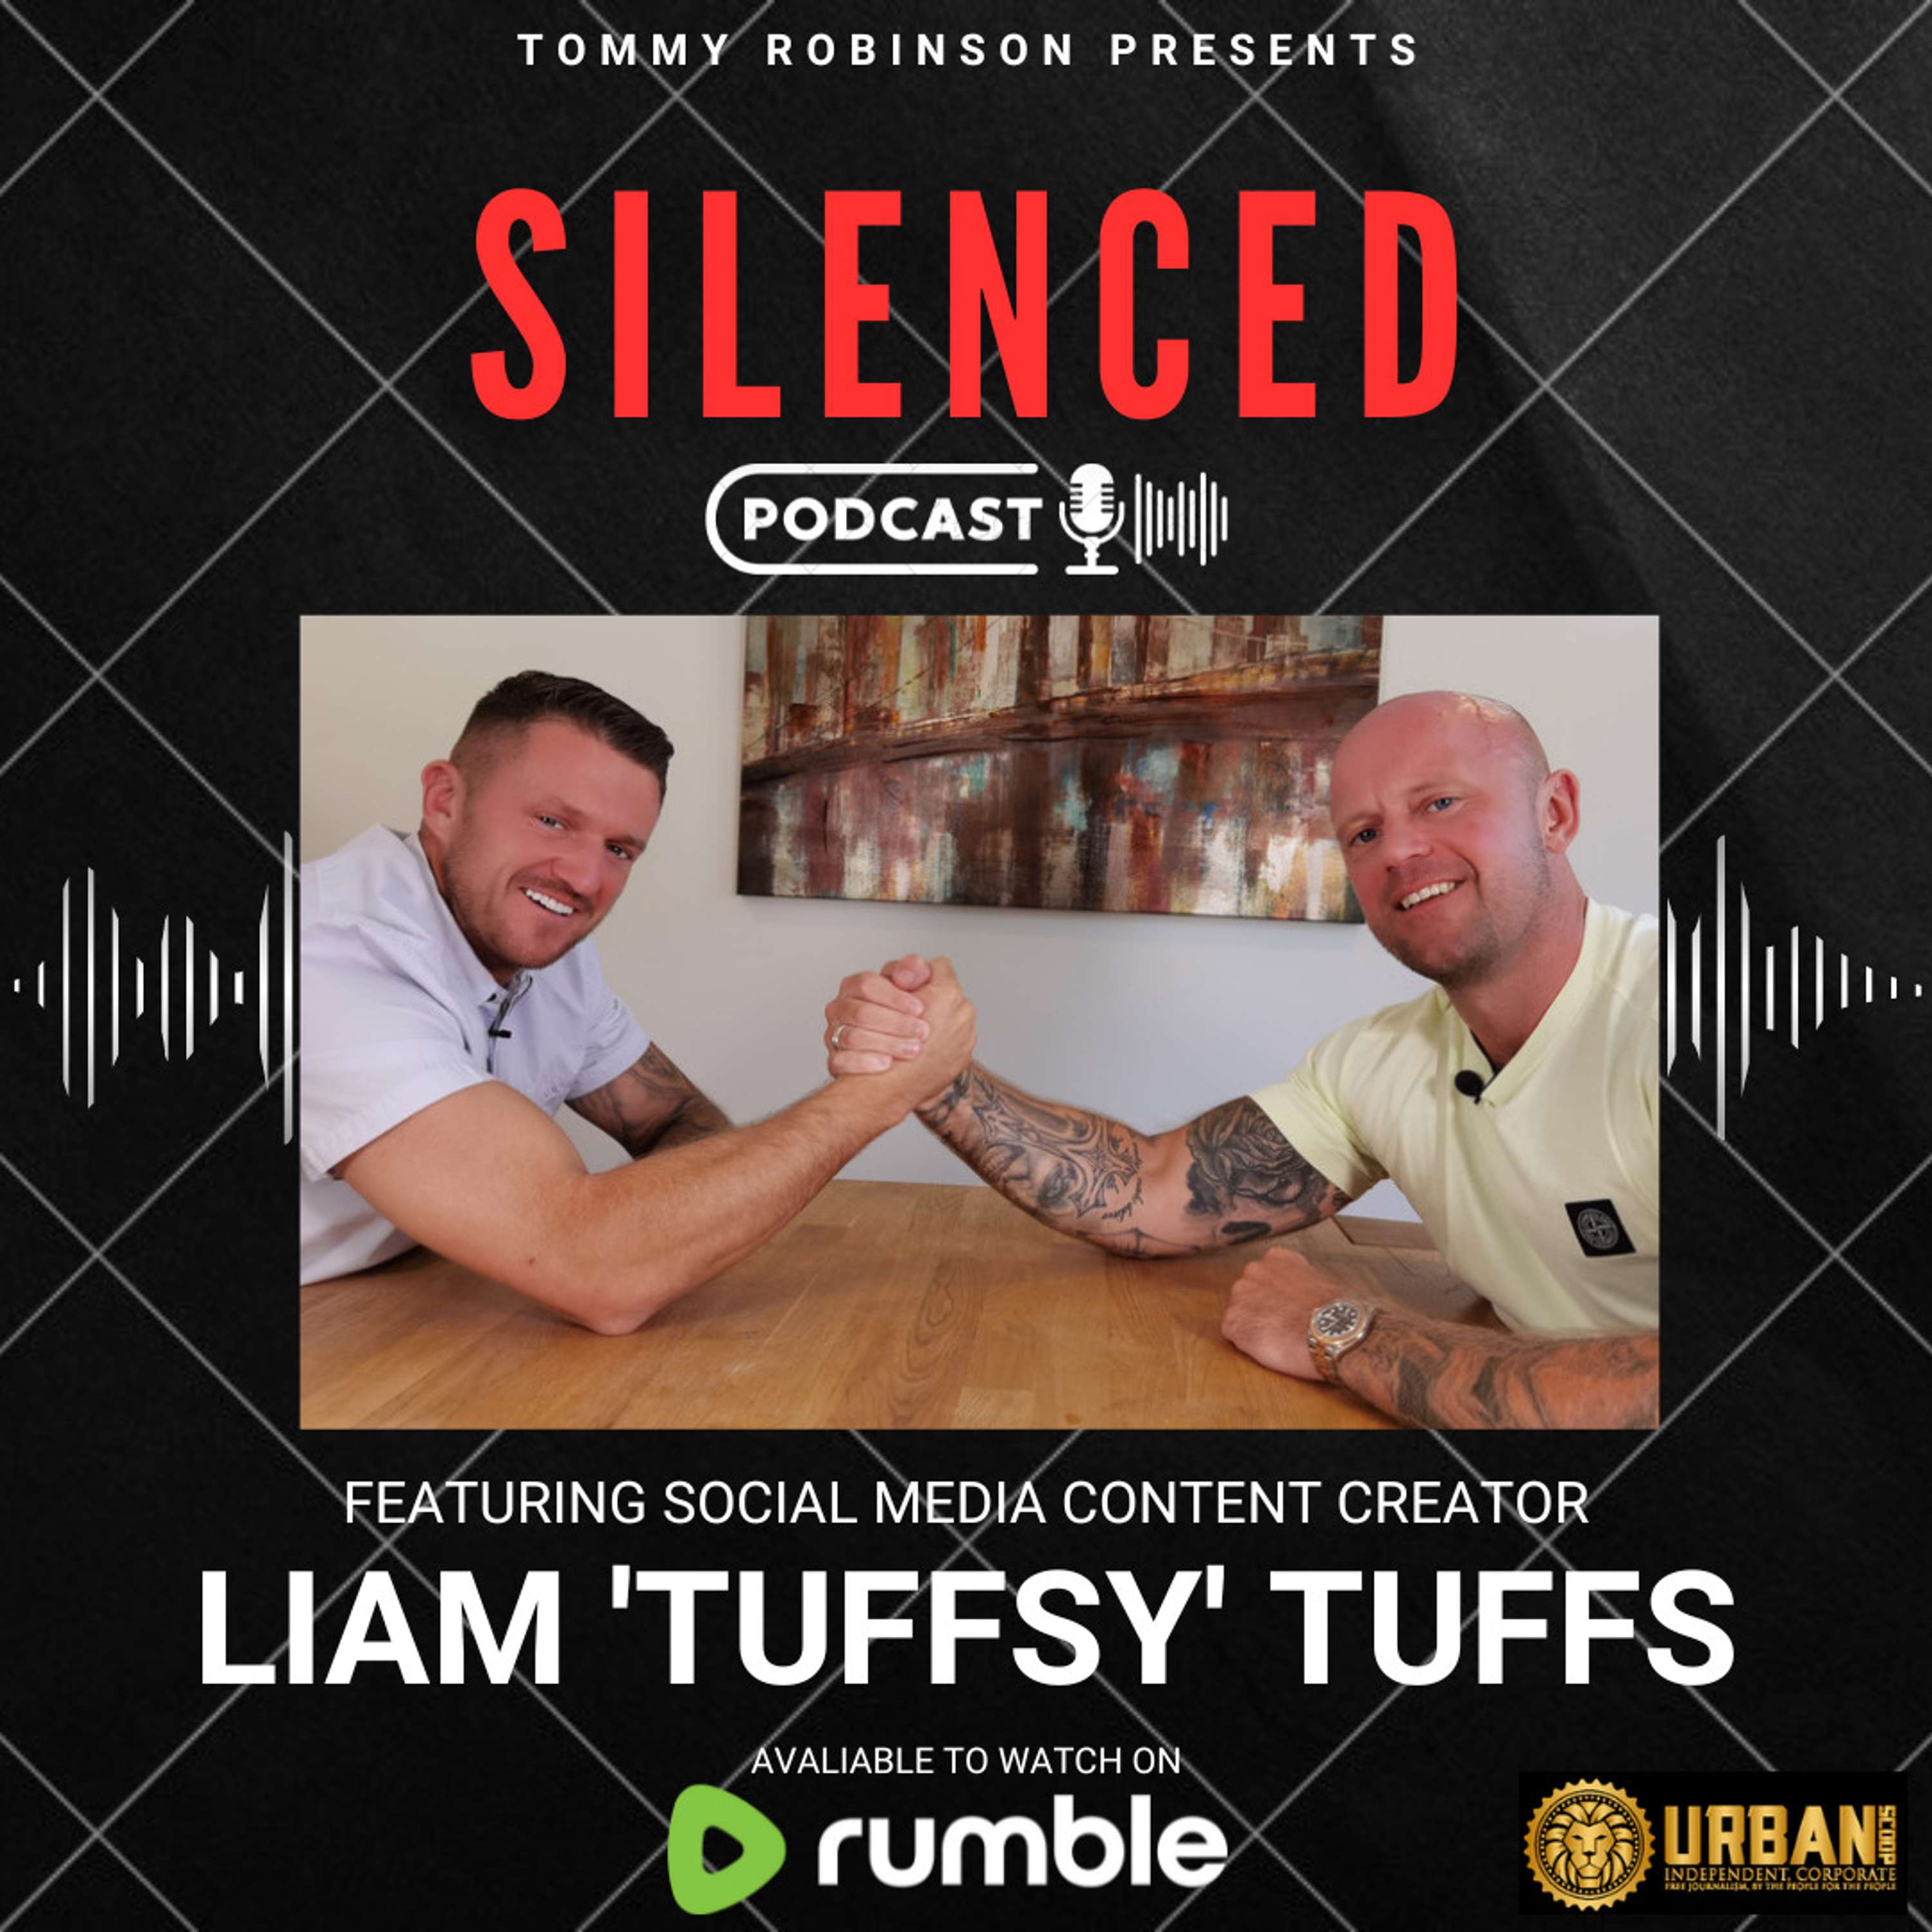 Episode 19 - SILENCED with Tommy Robinson - Liam Tuffs